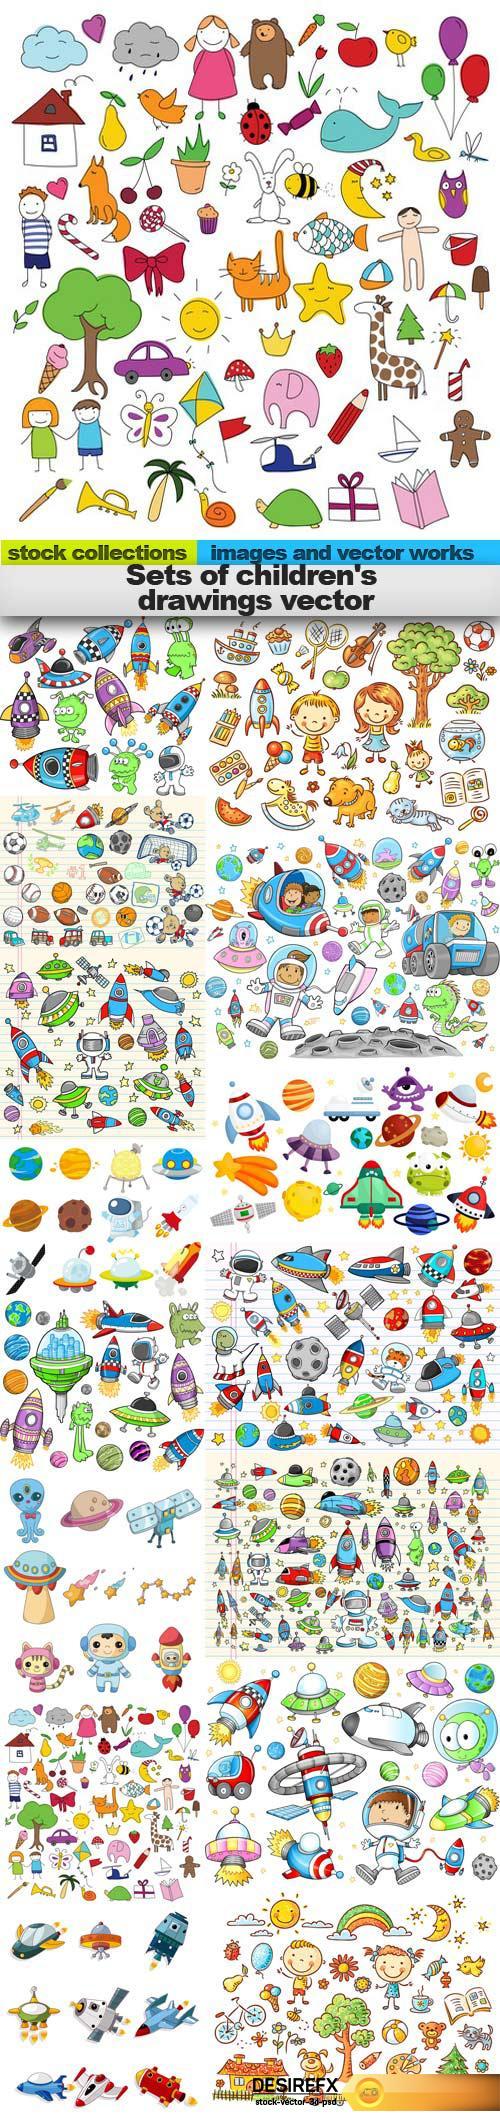 Sets of children's drawings vector, 15 x EPS